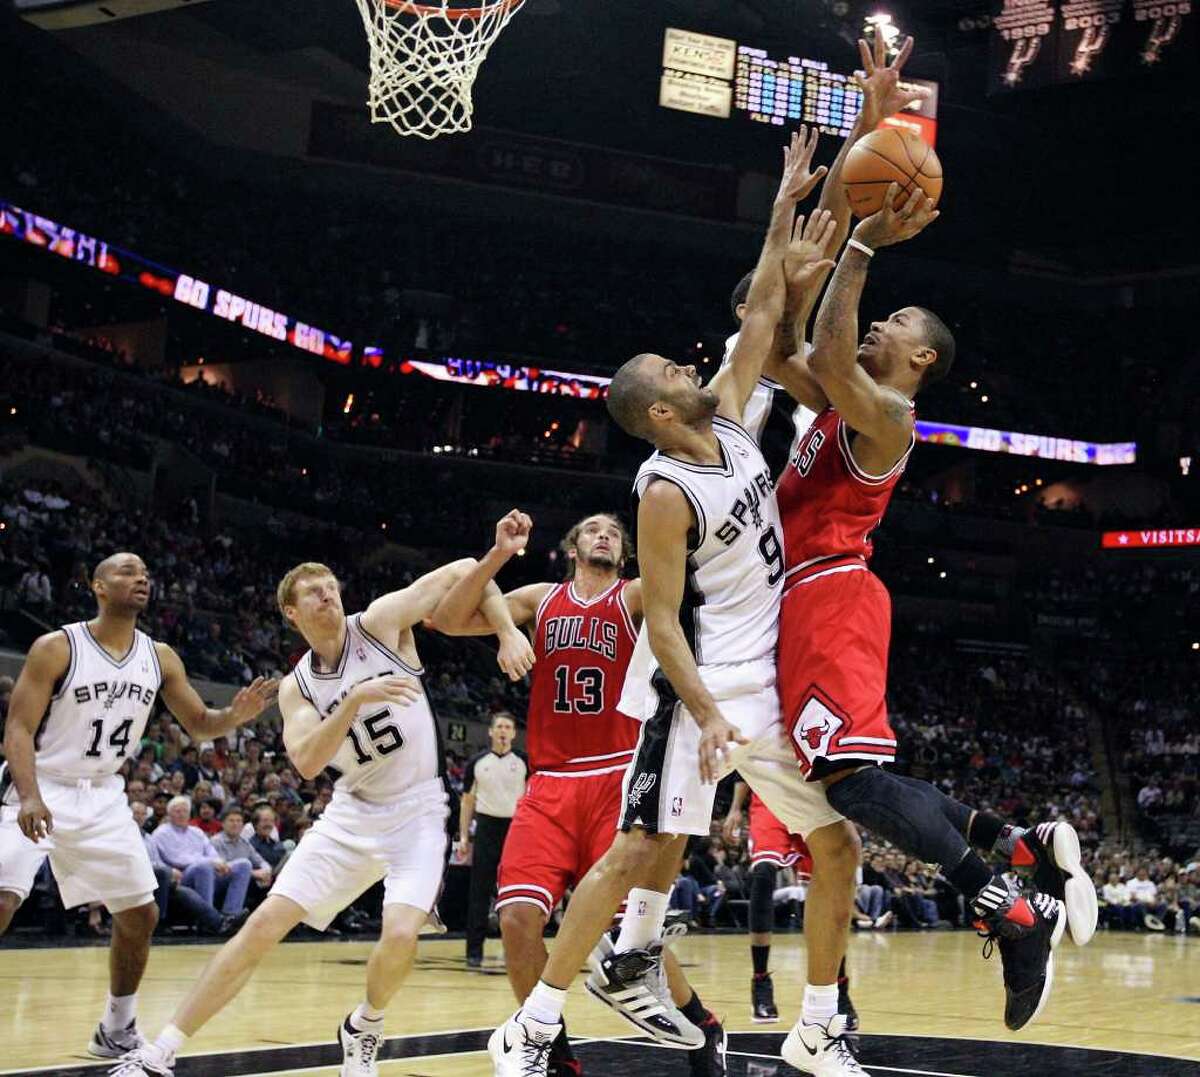 Chicago Bulls' Derrick Rose shoots over San Antonio Spurs' Tony Parker during first half action Wednesday Feb. 29, 2012 at the AT&T Center.